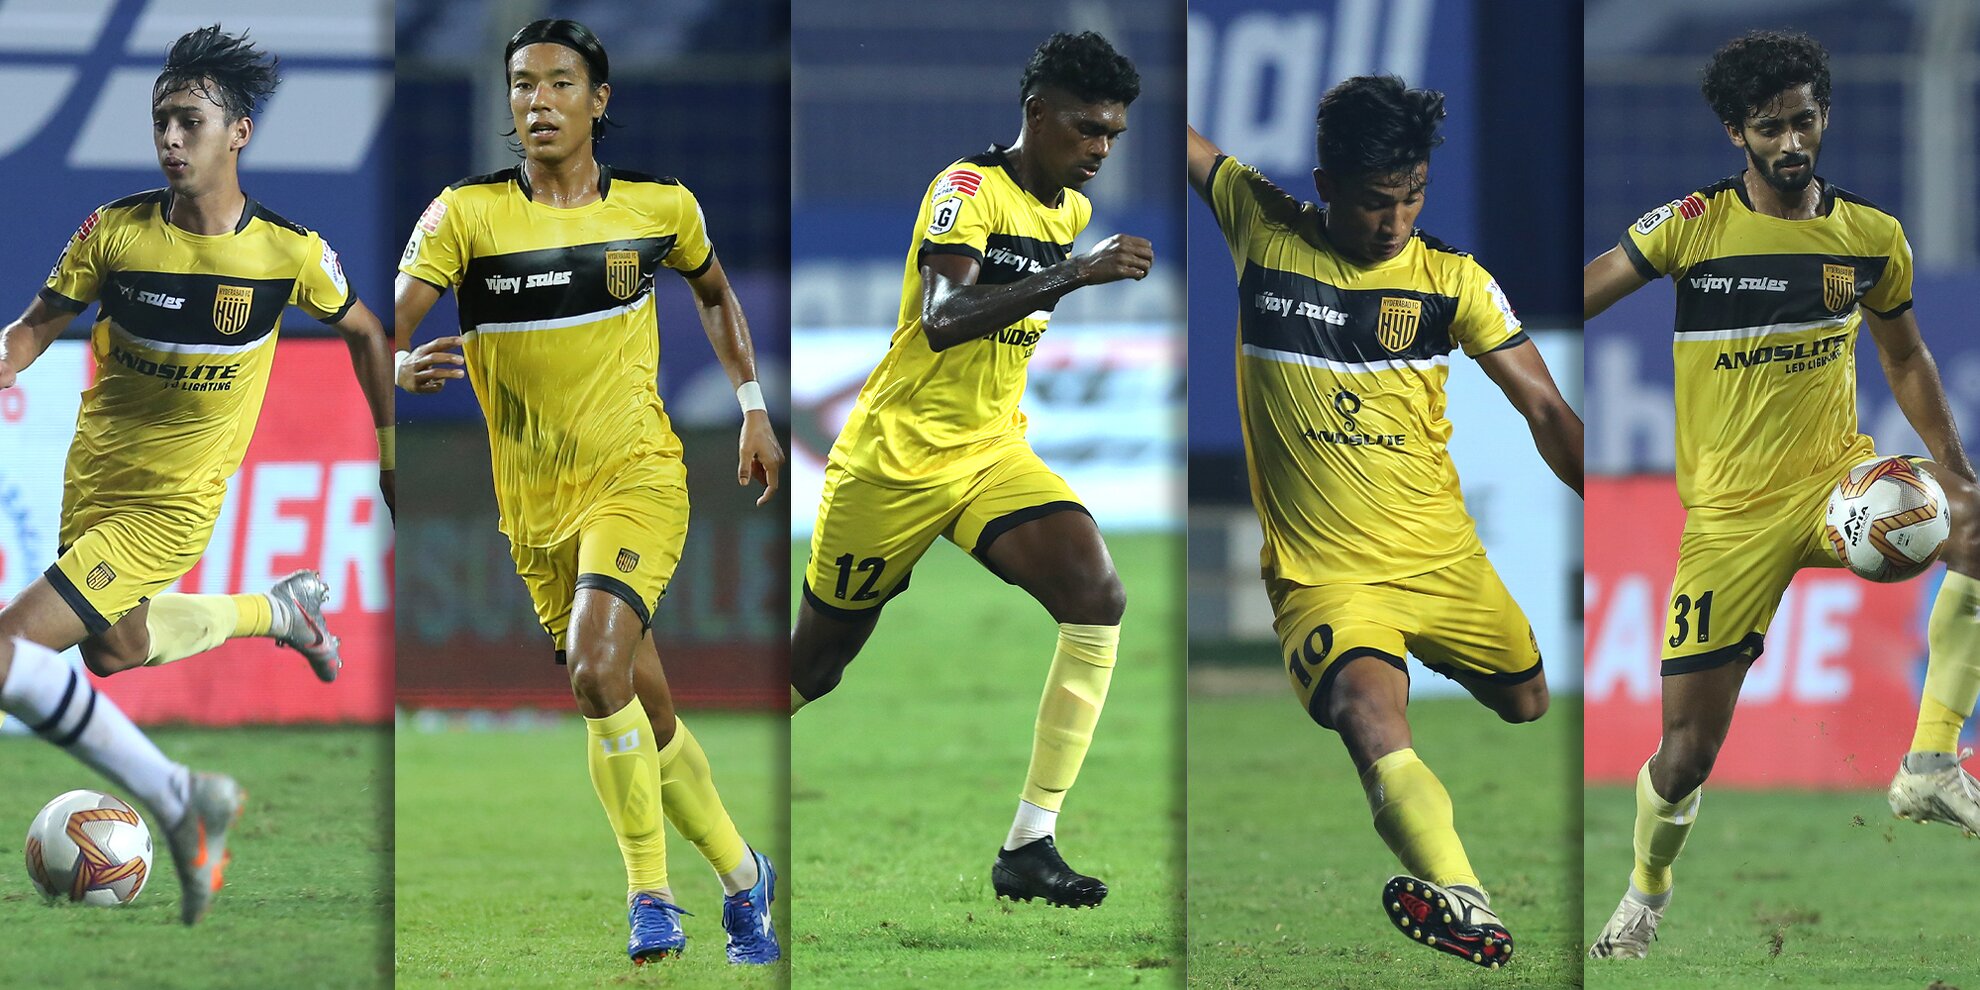 Hyderabad FC youngsters